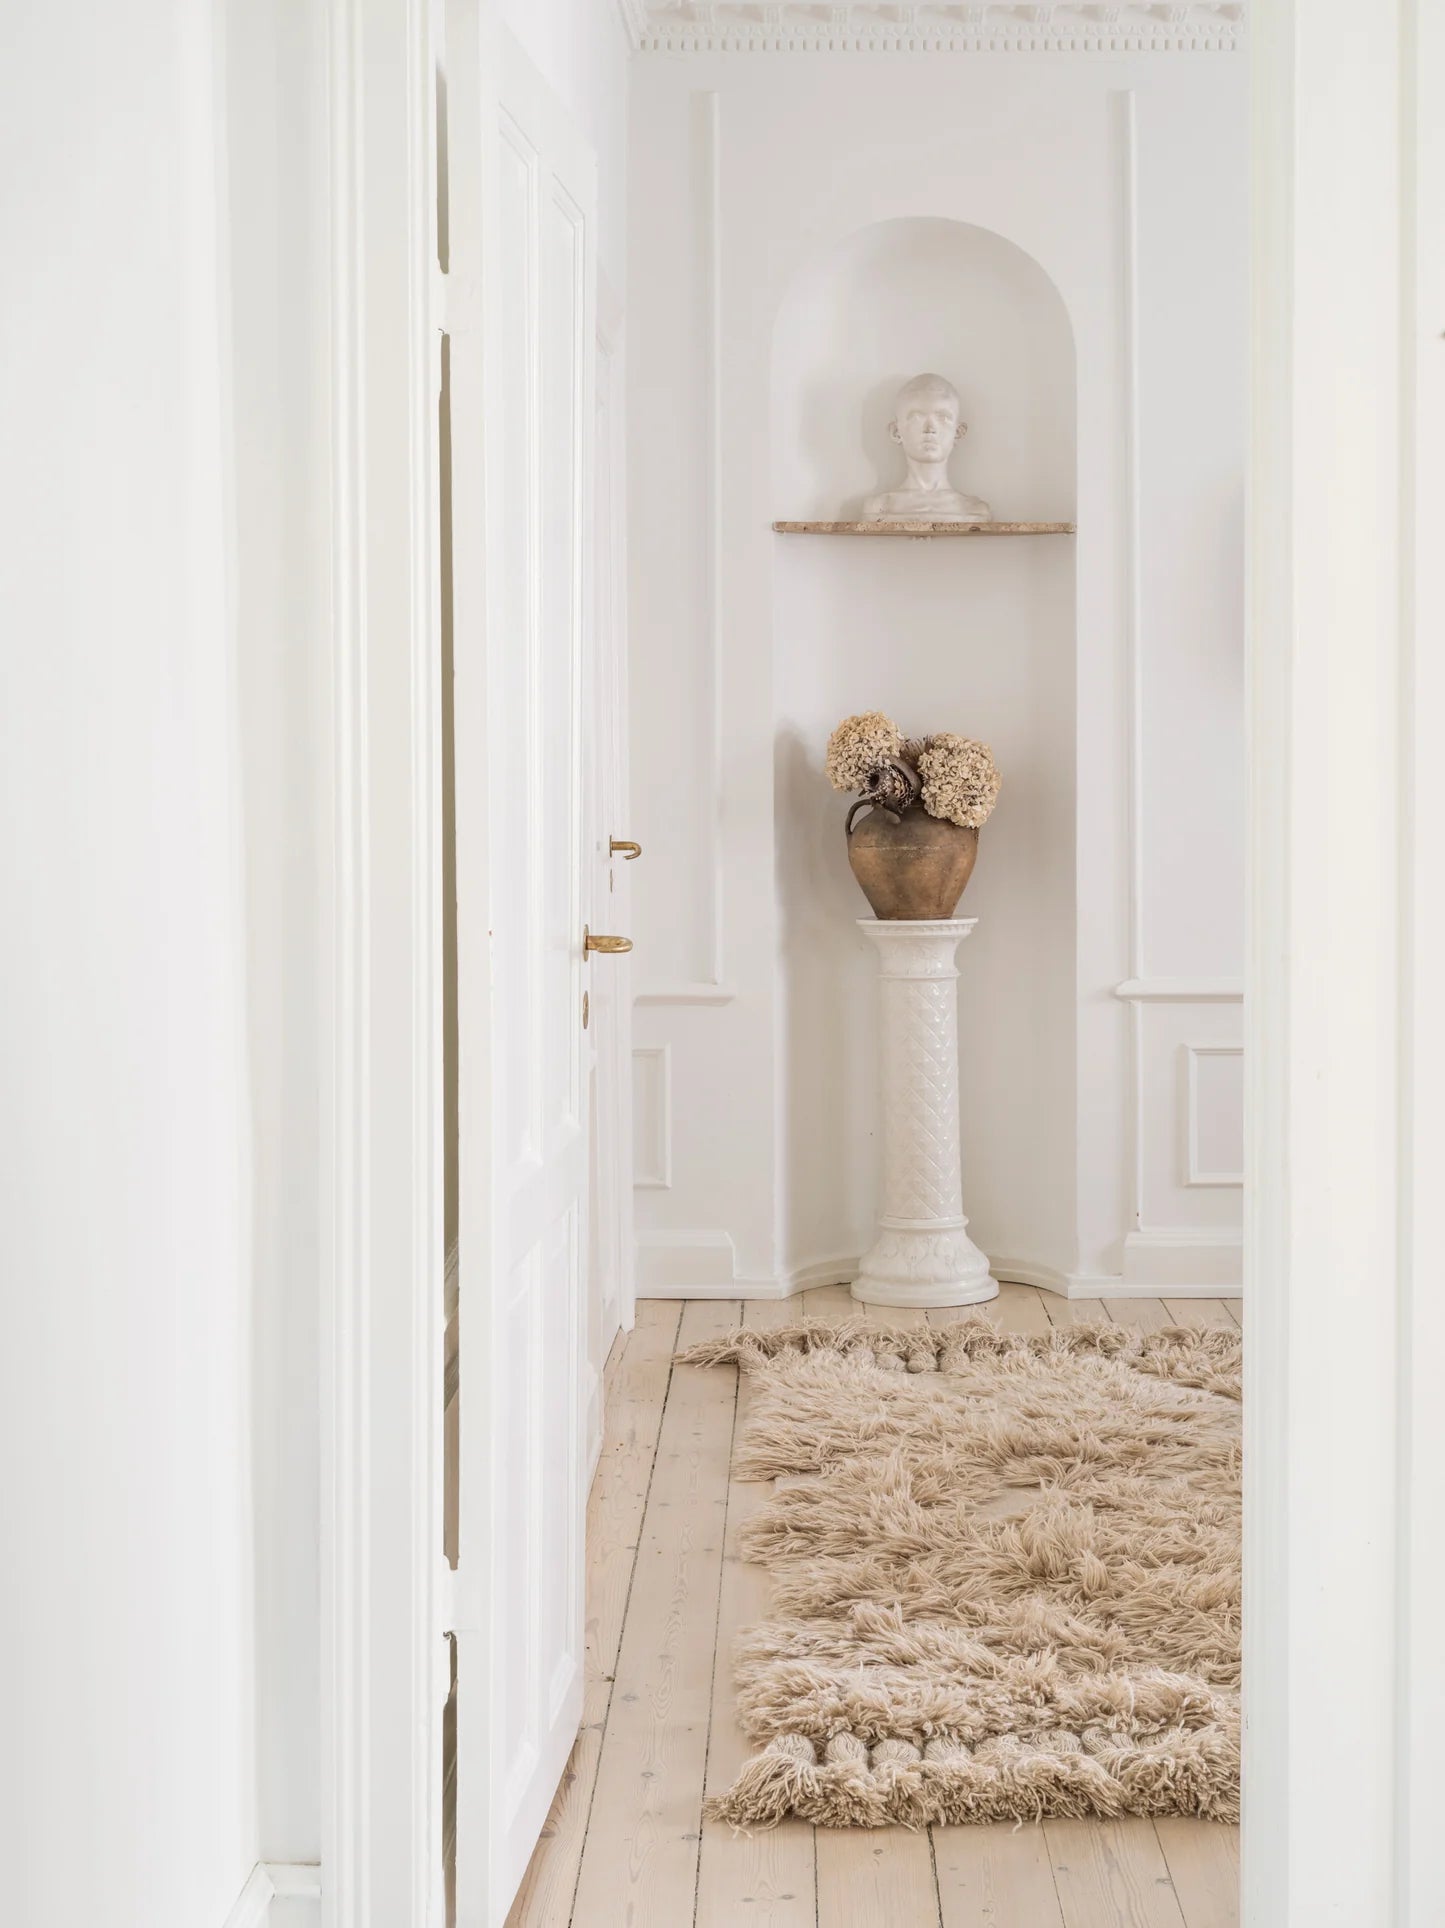 Handwoven high rug in white interior